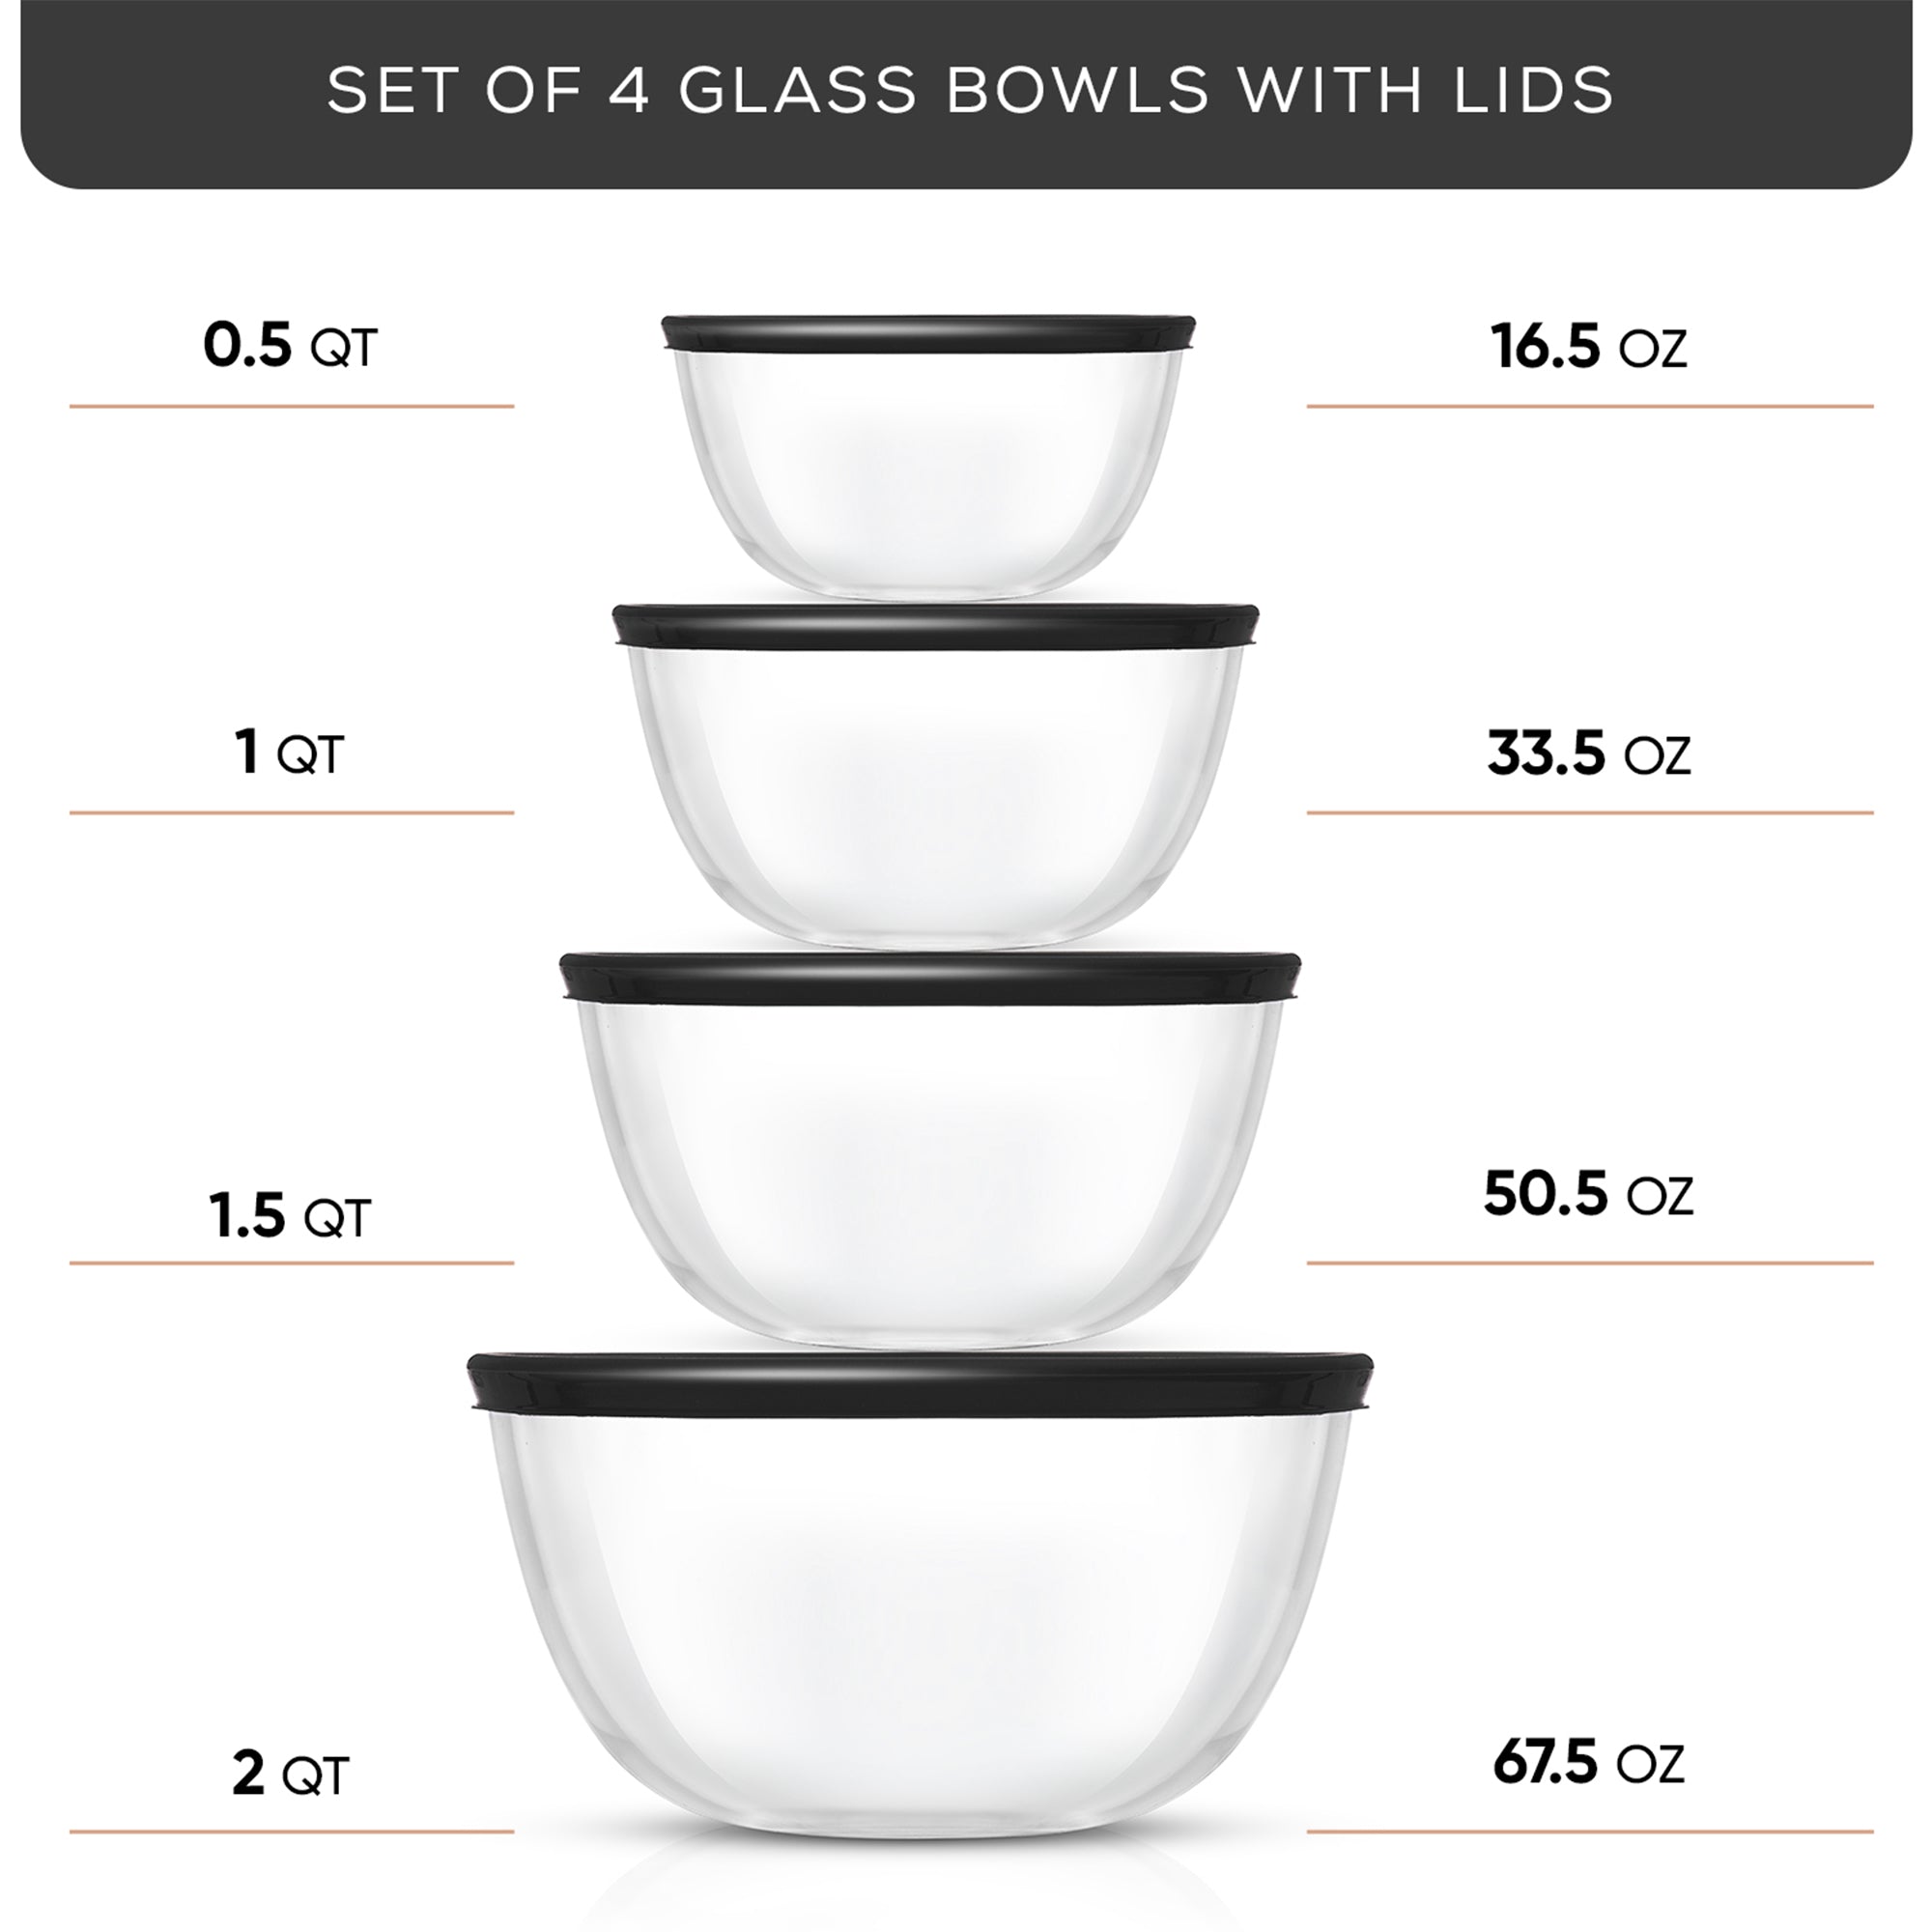 A set of four glass bowls with black lids arranged on a white background. Text printed on the image identifies the bowls as “SET OF 4 GLASS BOWLS WITH LIDS”. Each bowl has a capacity measurement (.5 QT, 1 QT, 1.5 QT, 2 QT) and its corresponding weight capacity (16.5 OZ, 33.5 OZ, 50.5 OZ, 67.5 OZ). 